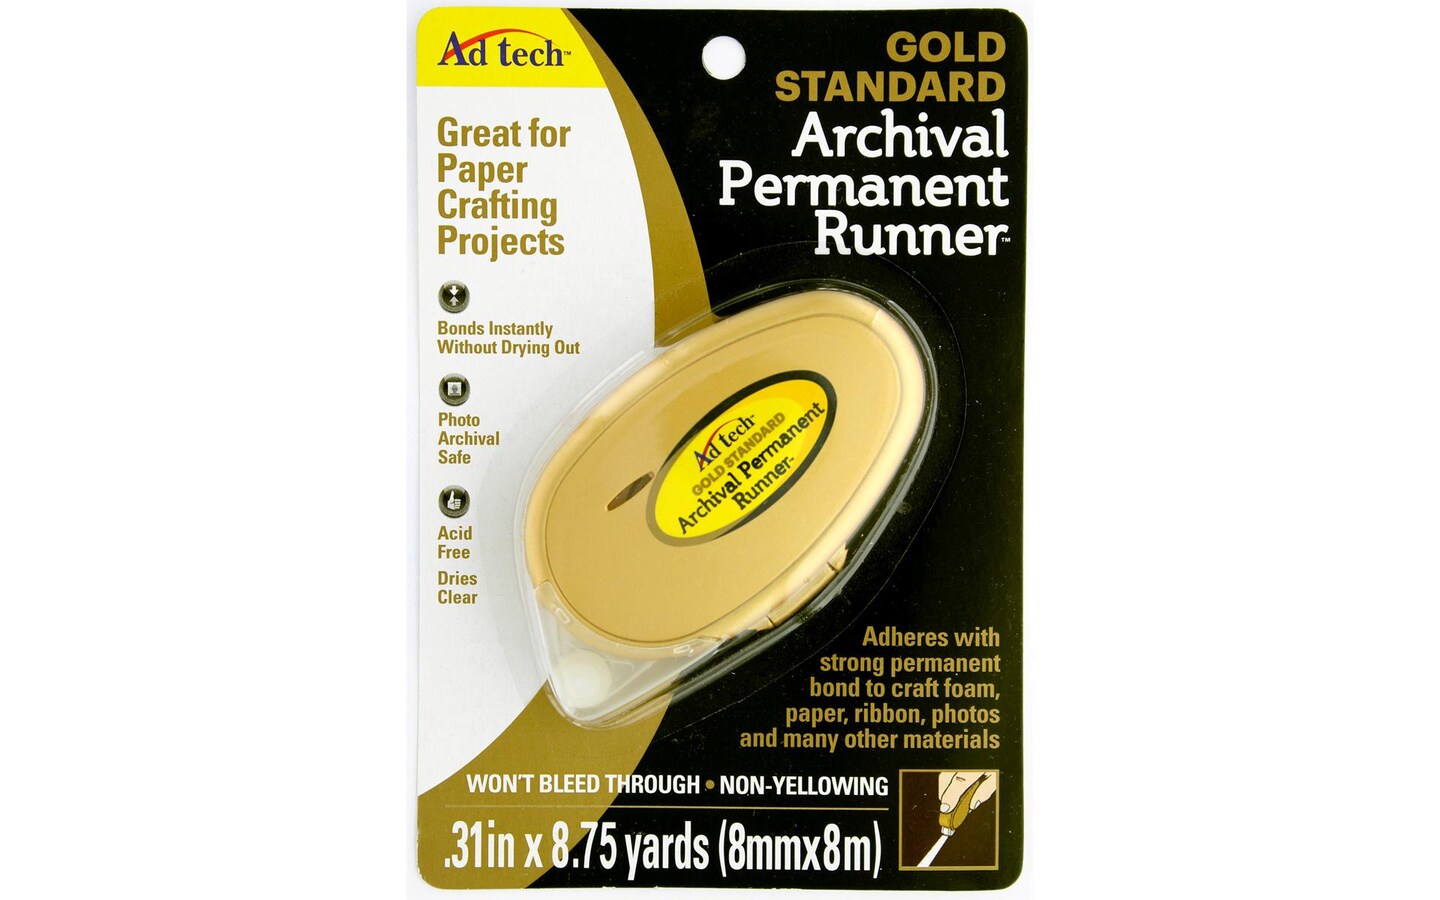 12 Pack: Adtech Archival Glue Runner Permanent, Size: 8.75, Clear